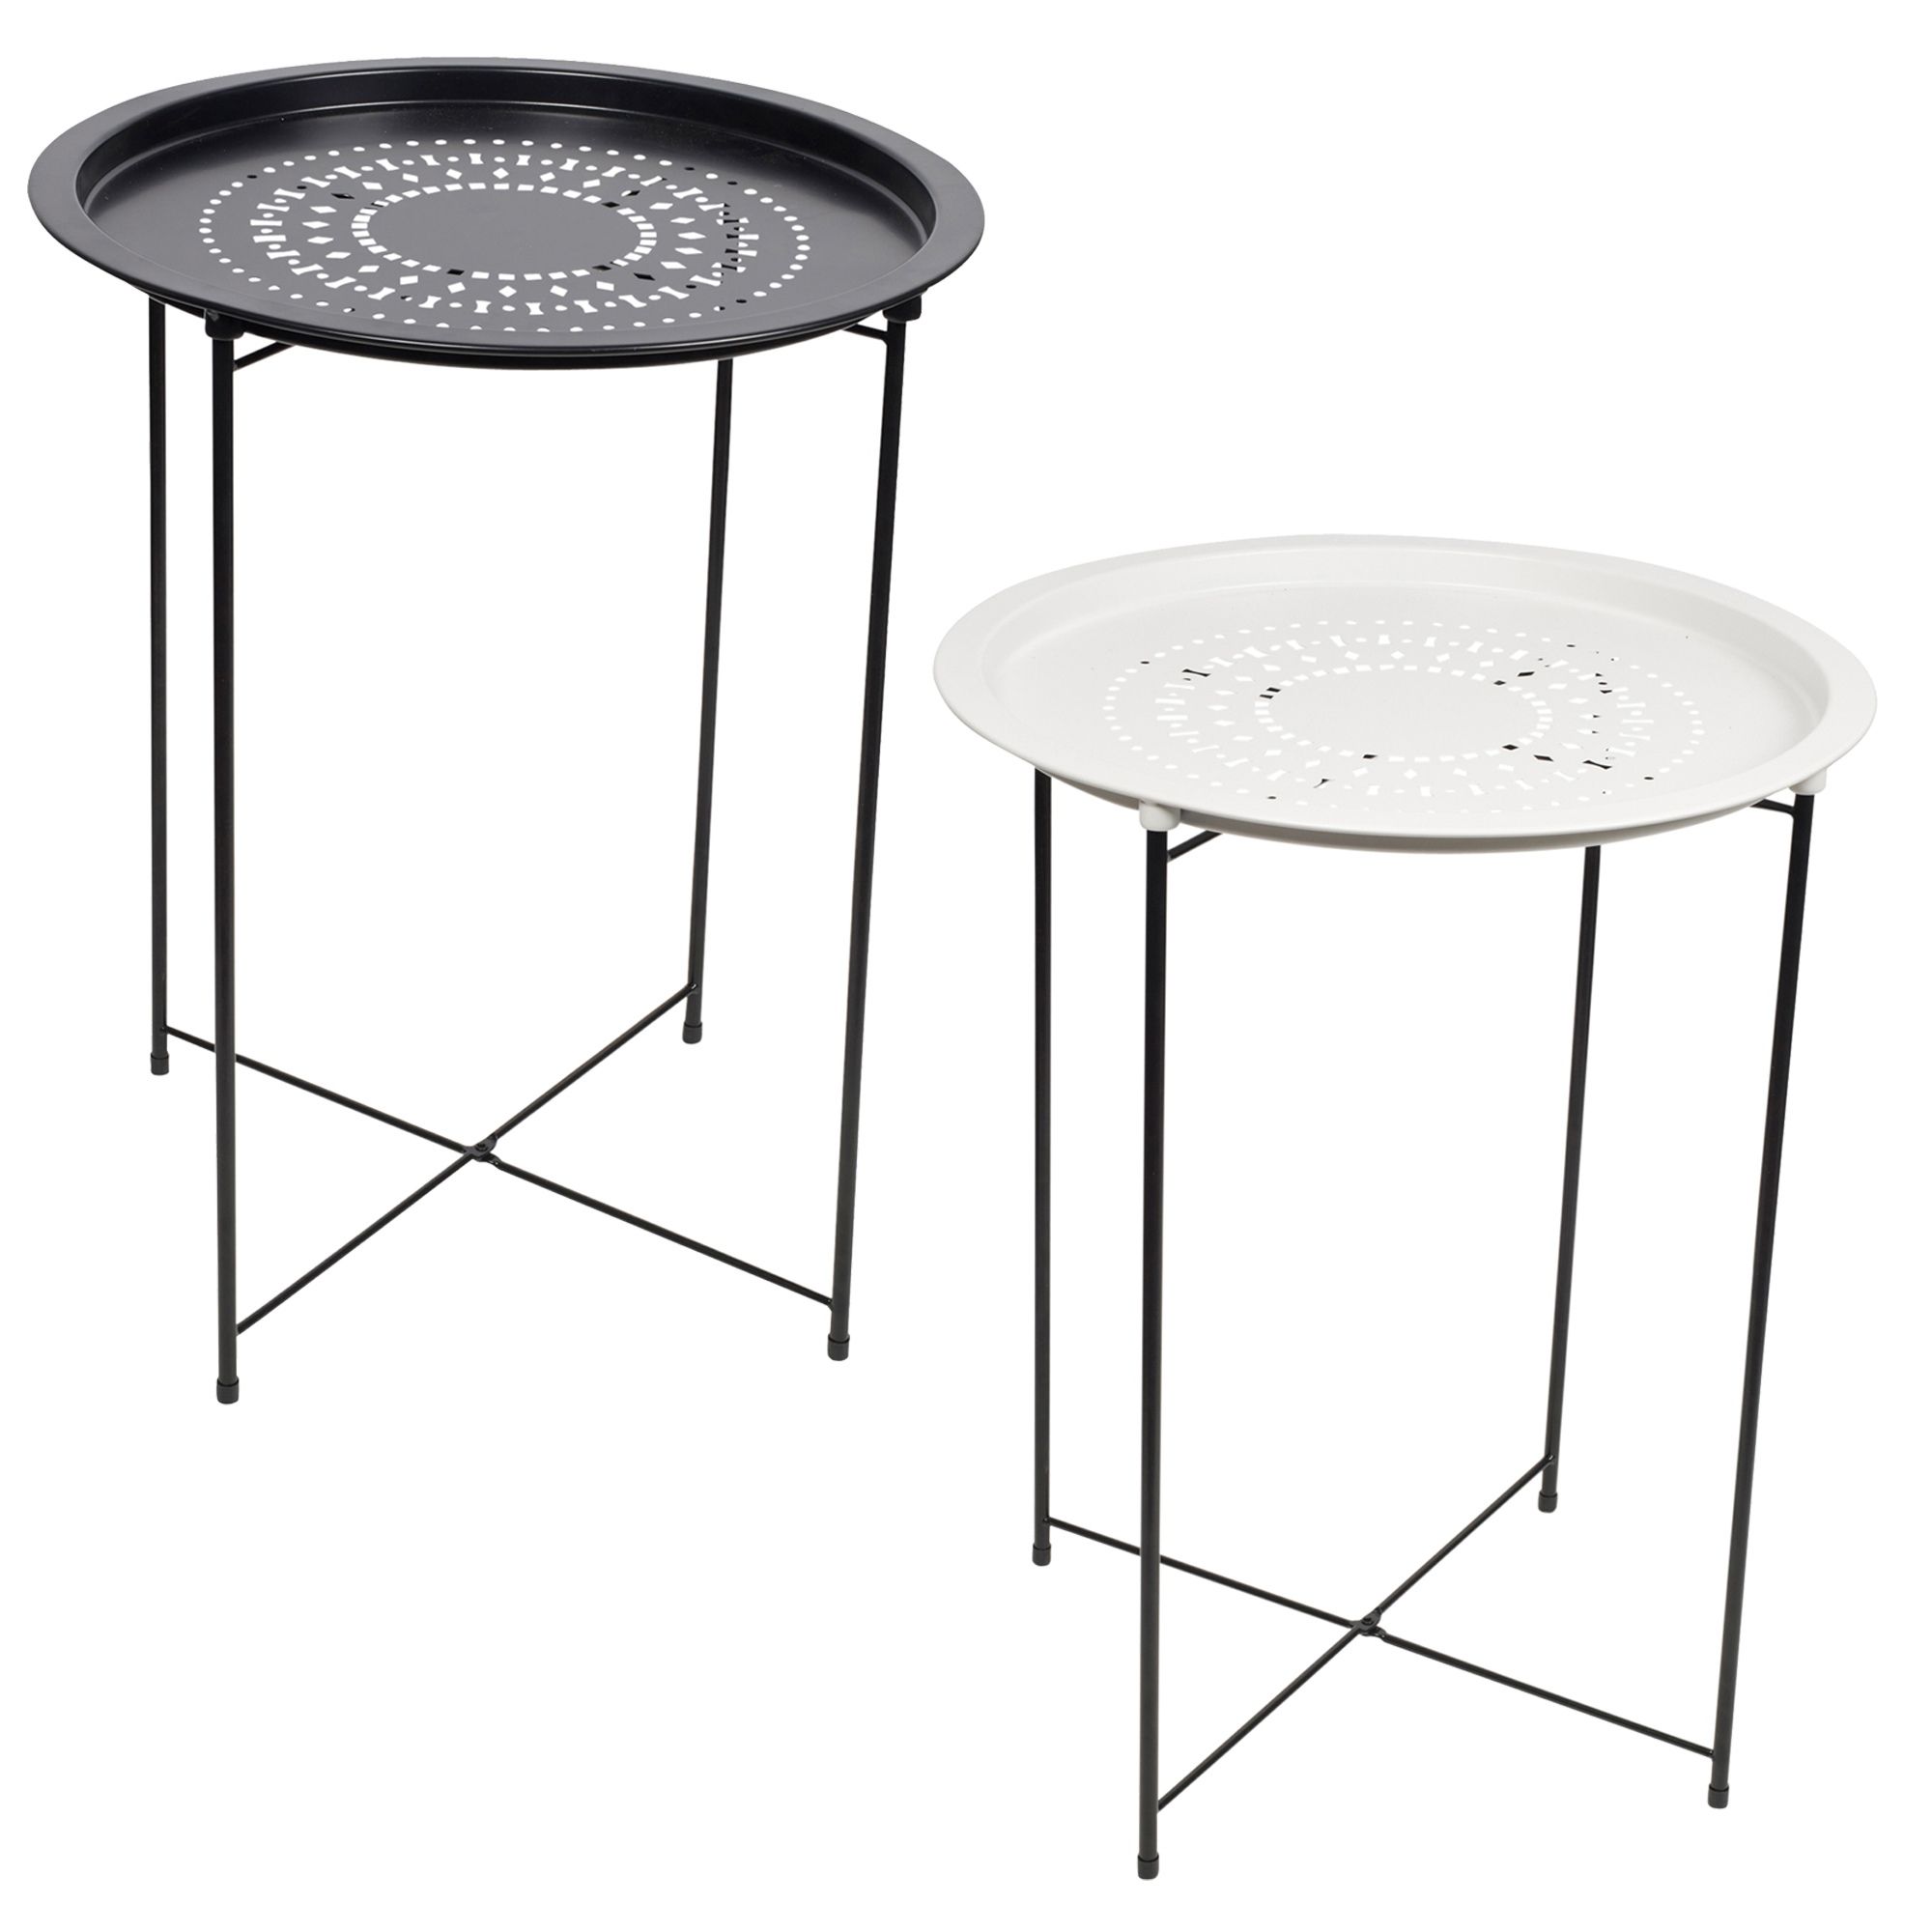 Round Black Metal Outdoor Coffee Table : Garden Treasures Davenport Within Round Steel Patio Coffee Tables (Gallery 19 of 20)